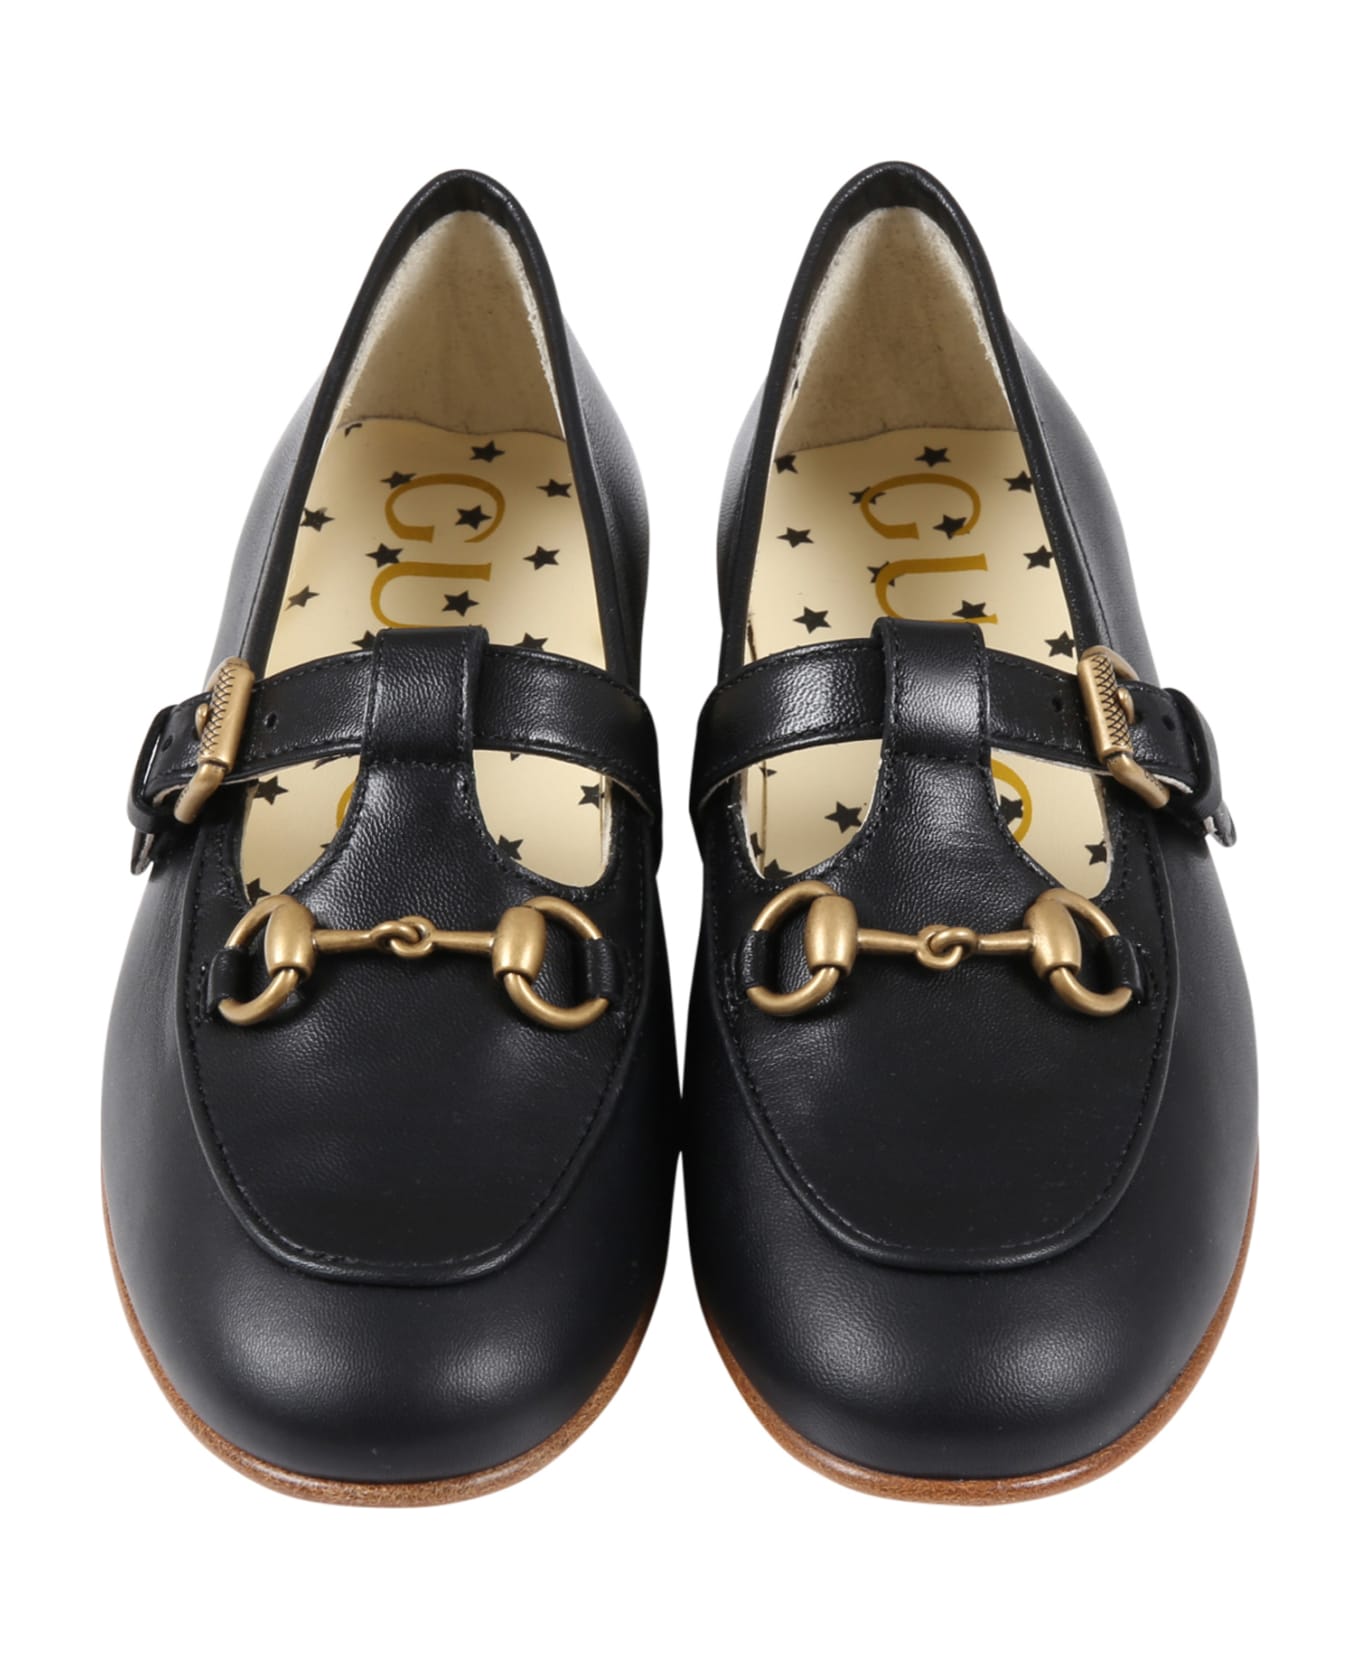 Gucci Black Loafers For Kids With Horsebit - Black シューズ